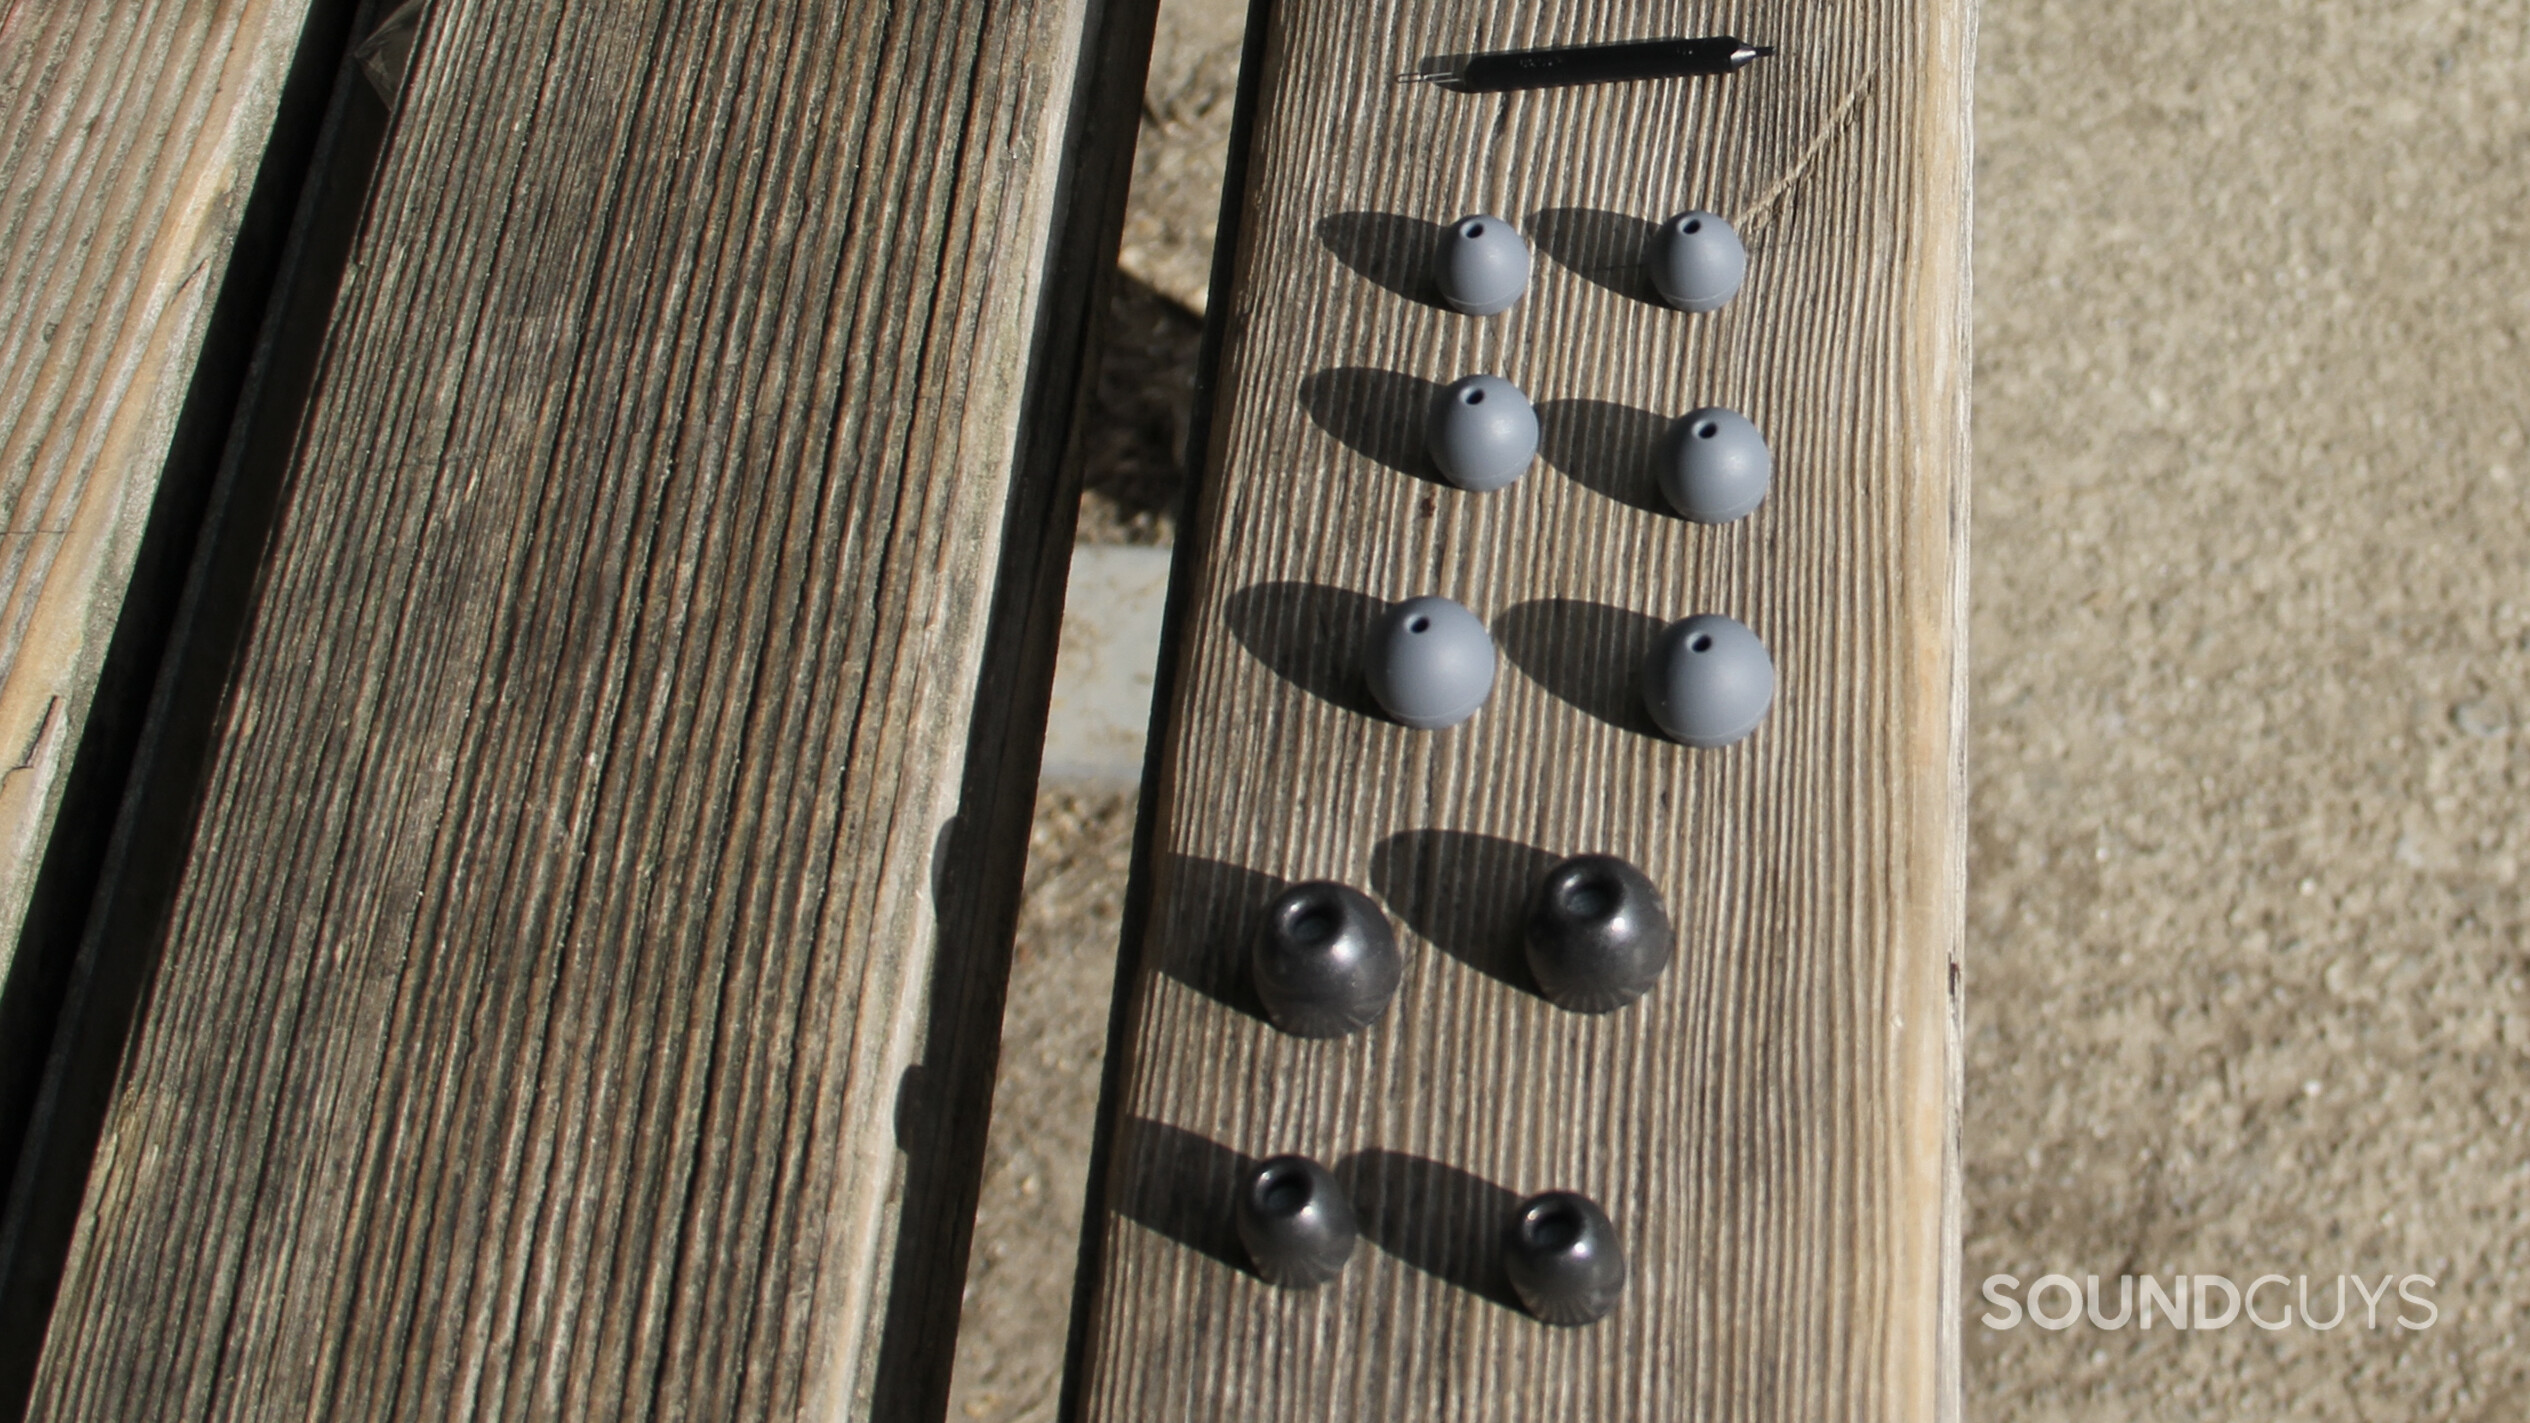 Five sets of ear tips and one cleaner included with the Shure AONIC 215 Gen 2 spread on a bench.